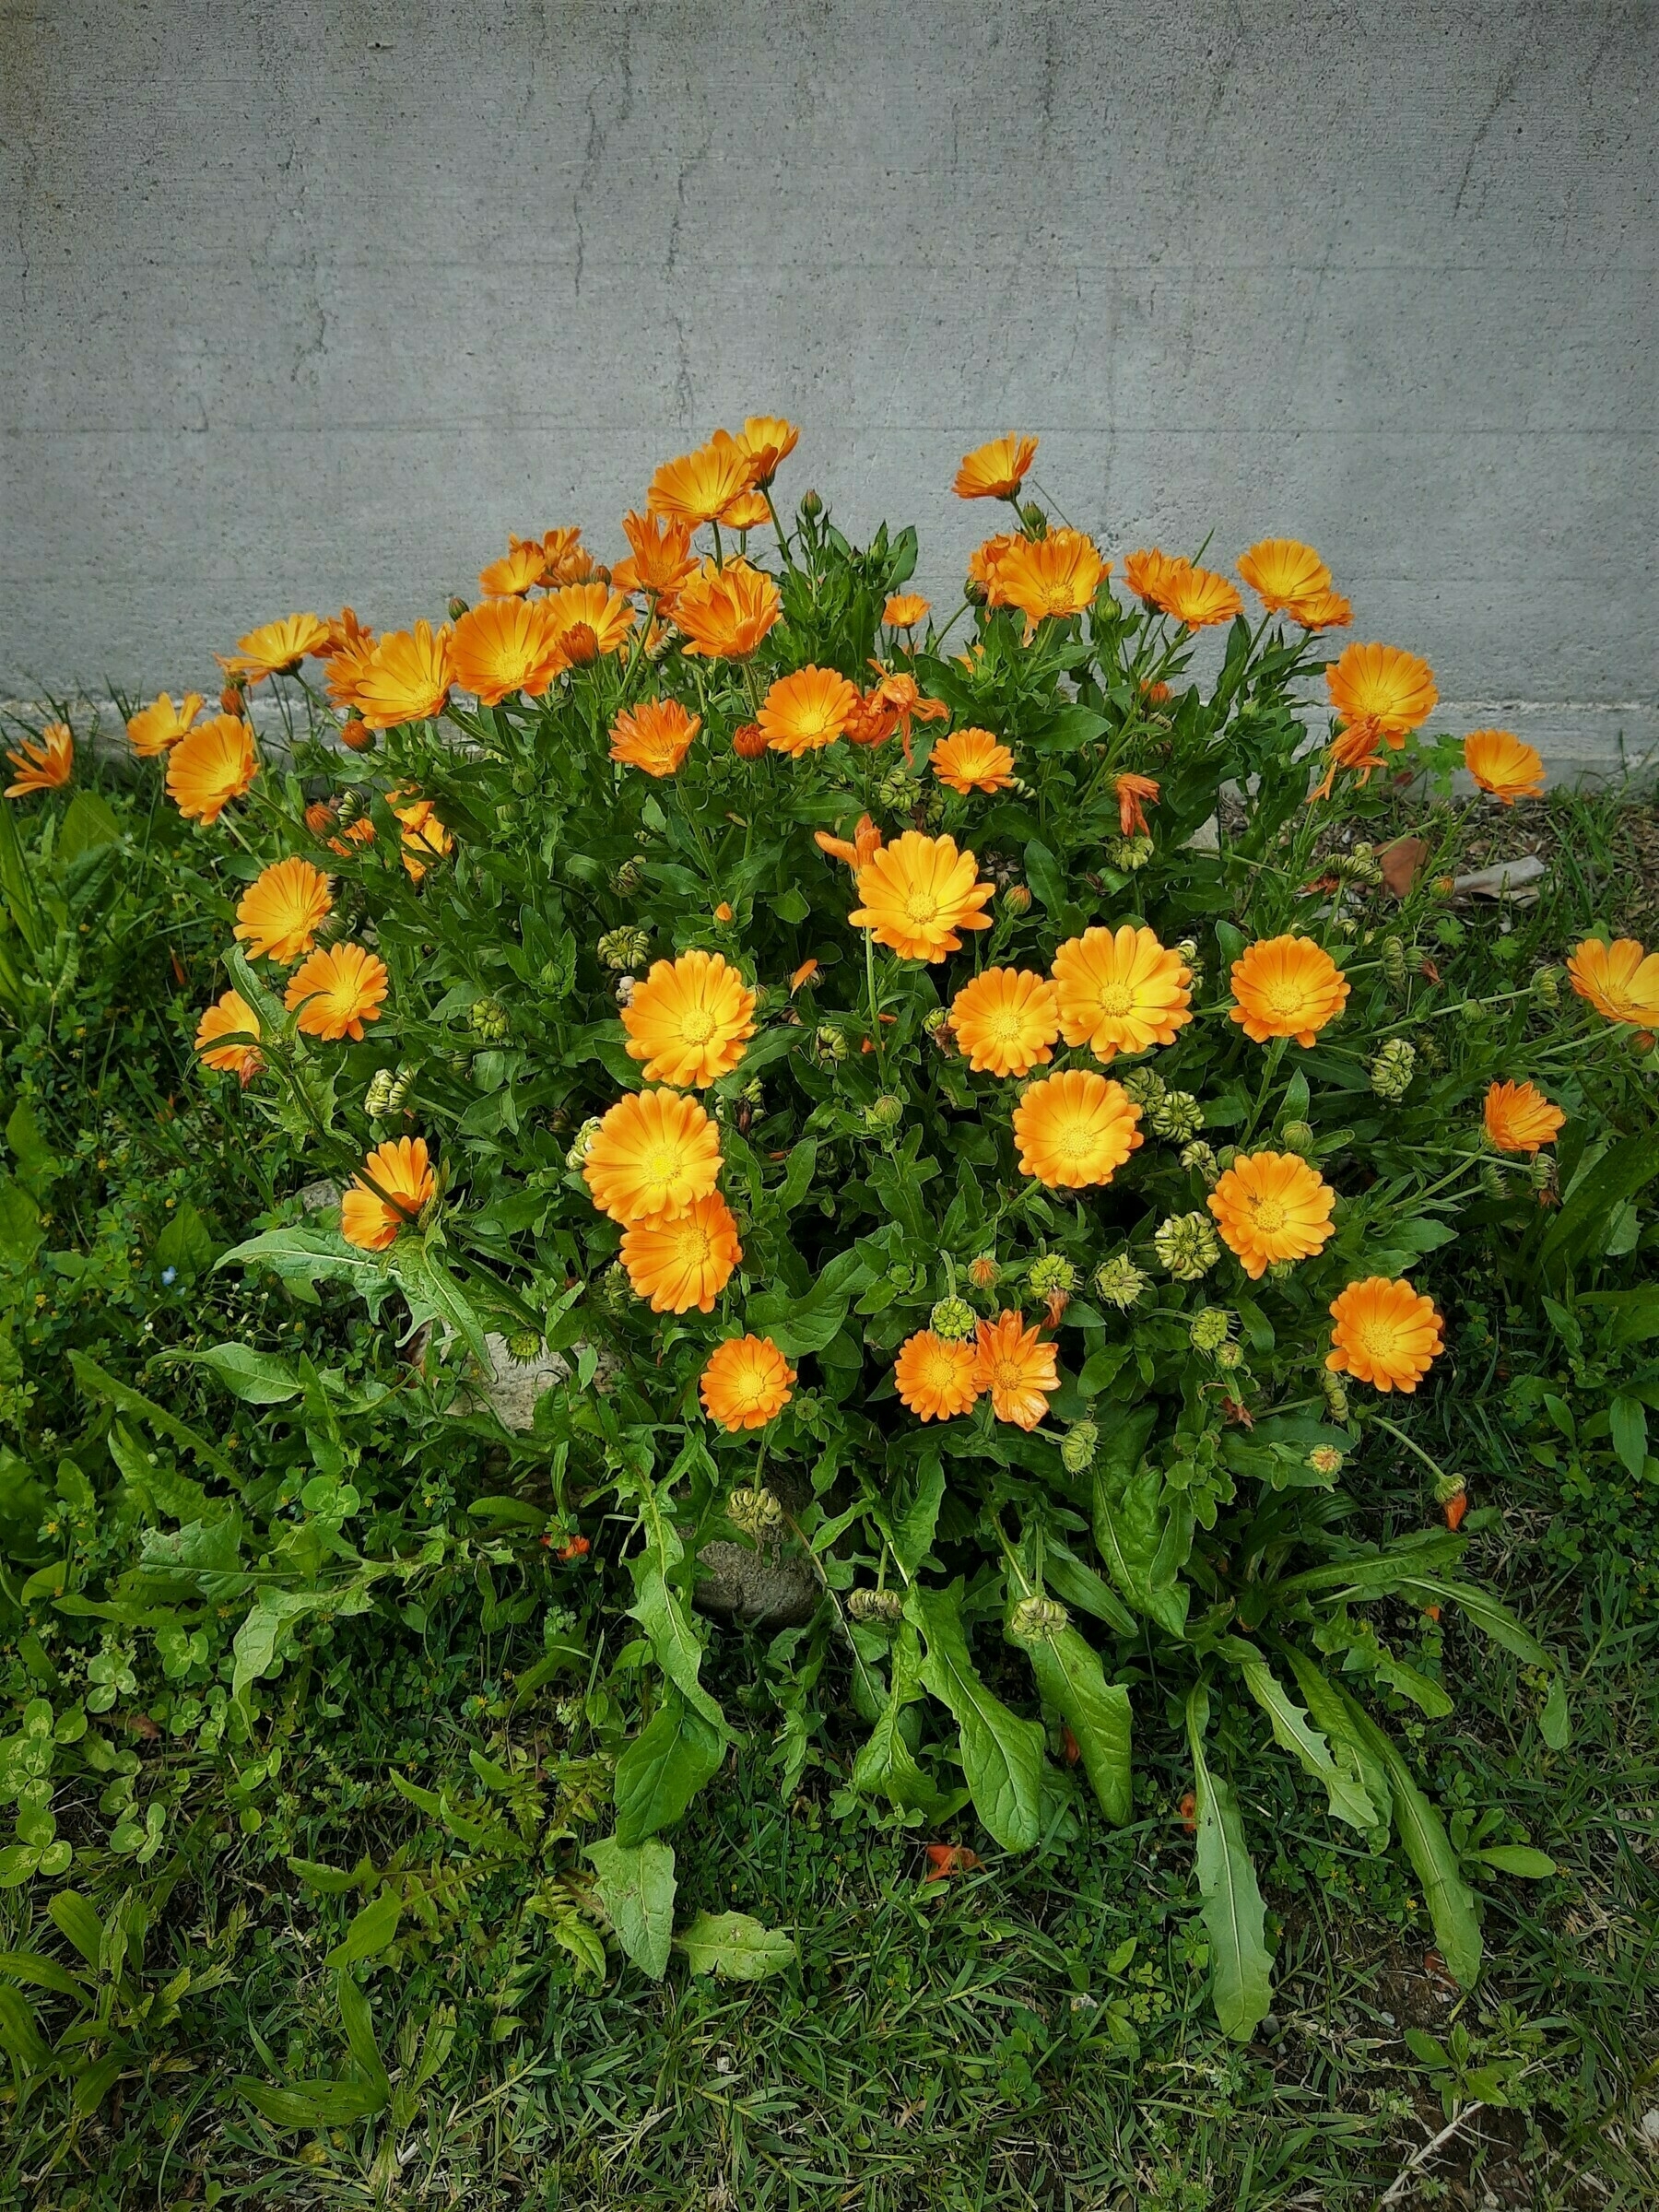 A photo showing some flowers